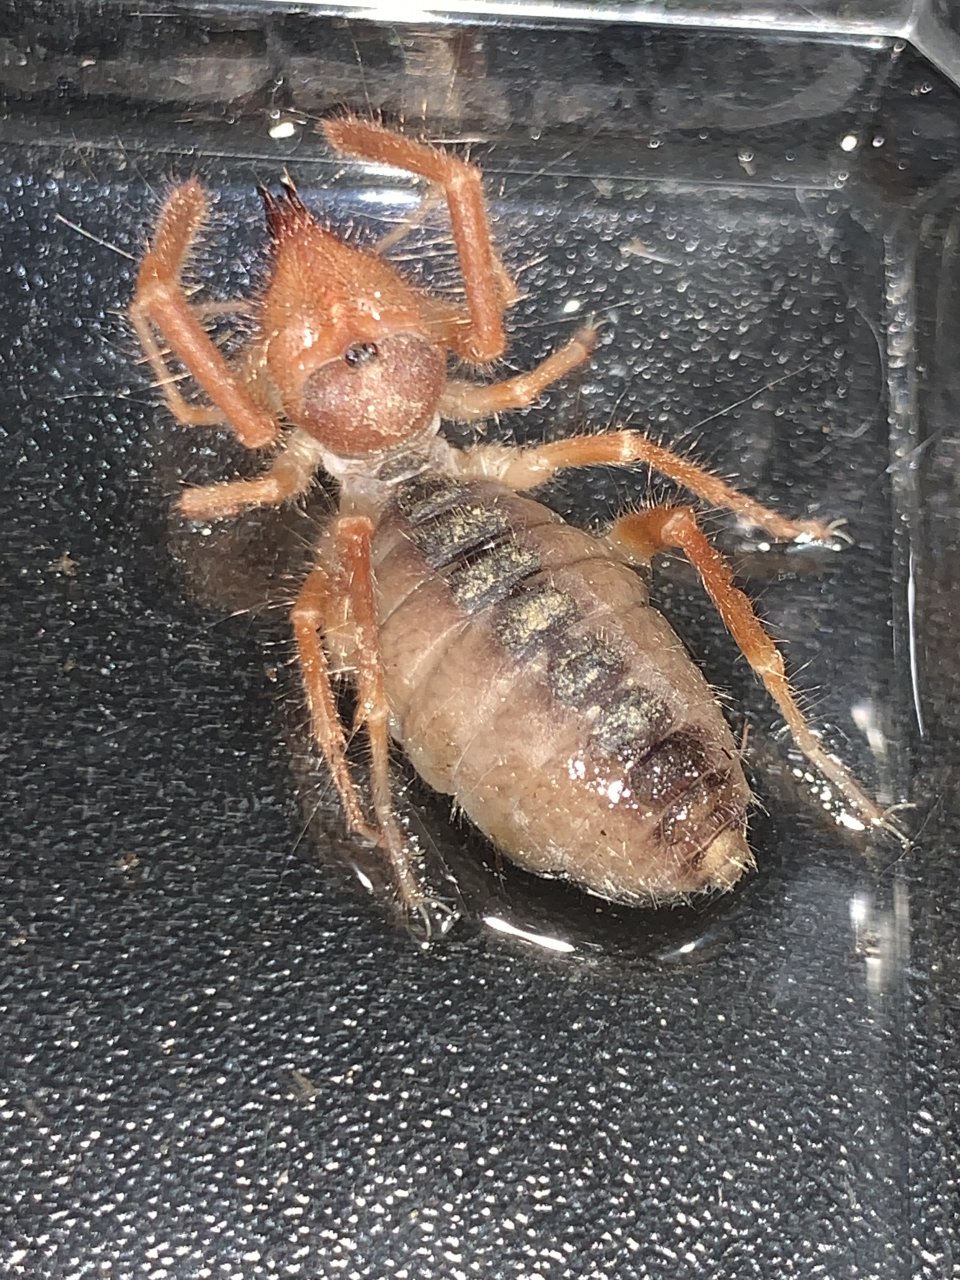 Found this beautiful and feisty  Solifugae